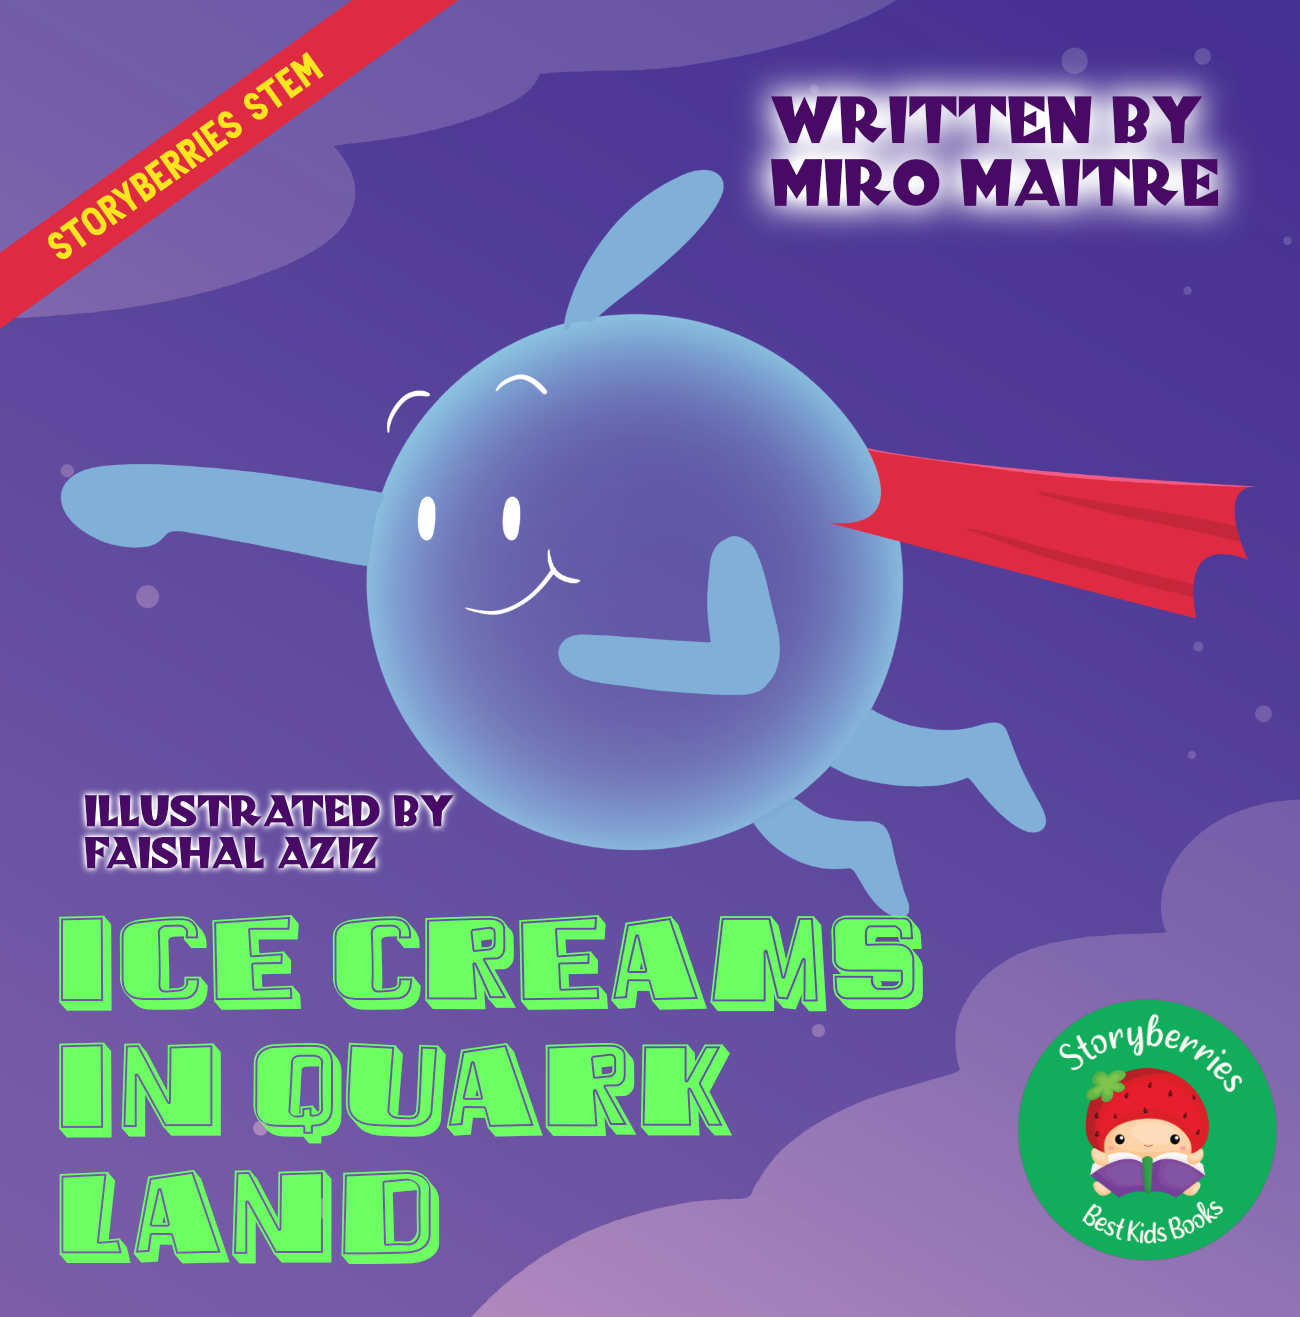 Bedtime Stories Ice Creams in Quark Land by Miro Maitre short stories for kids free STEM books page 1